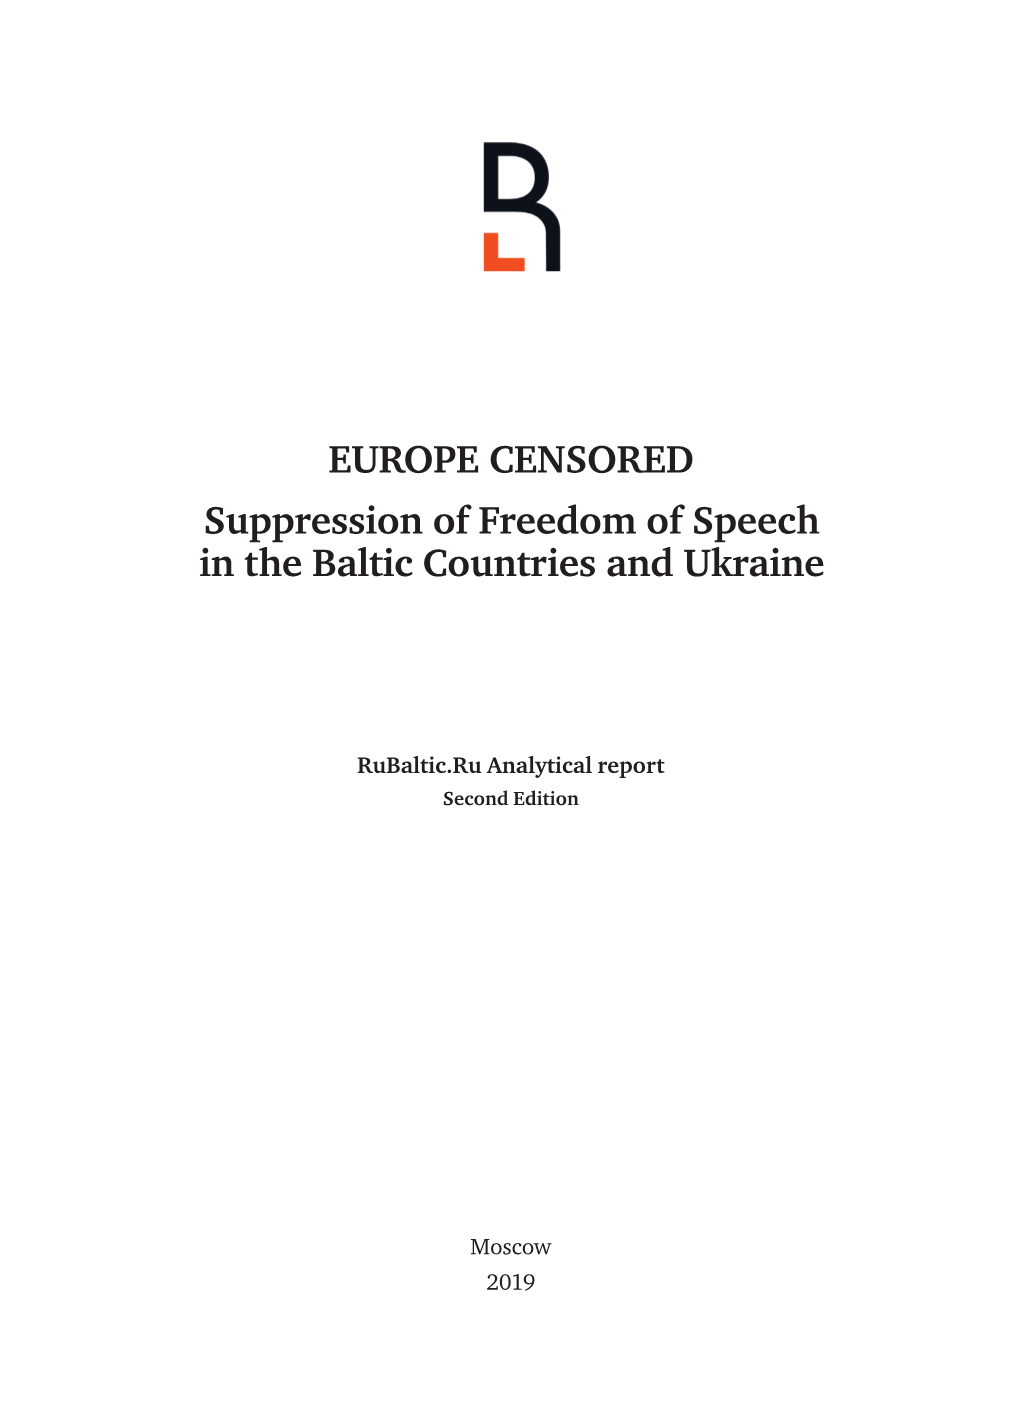 EUROPE CENSORED Suppression of Freedom of Speech in the Baltic Countries and Ukraine